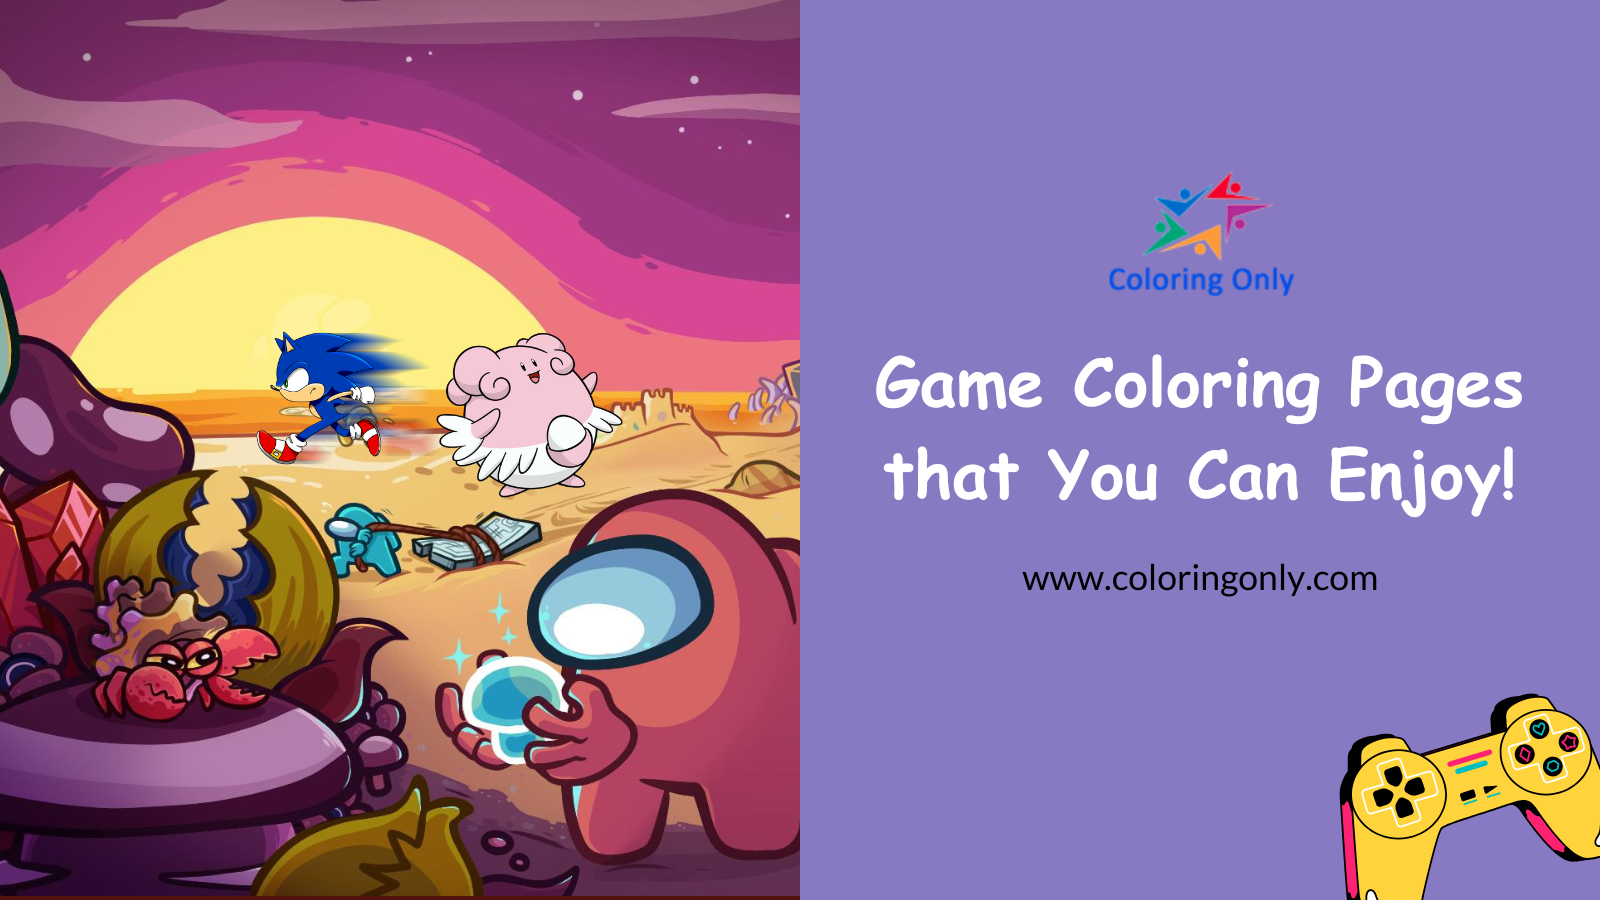 Game Coloring Pages that You Can Enjoy!